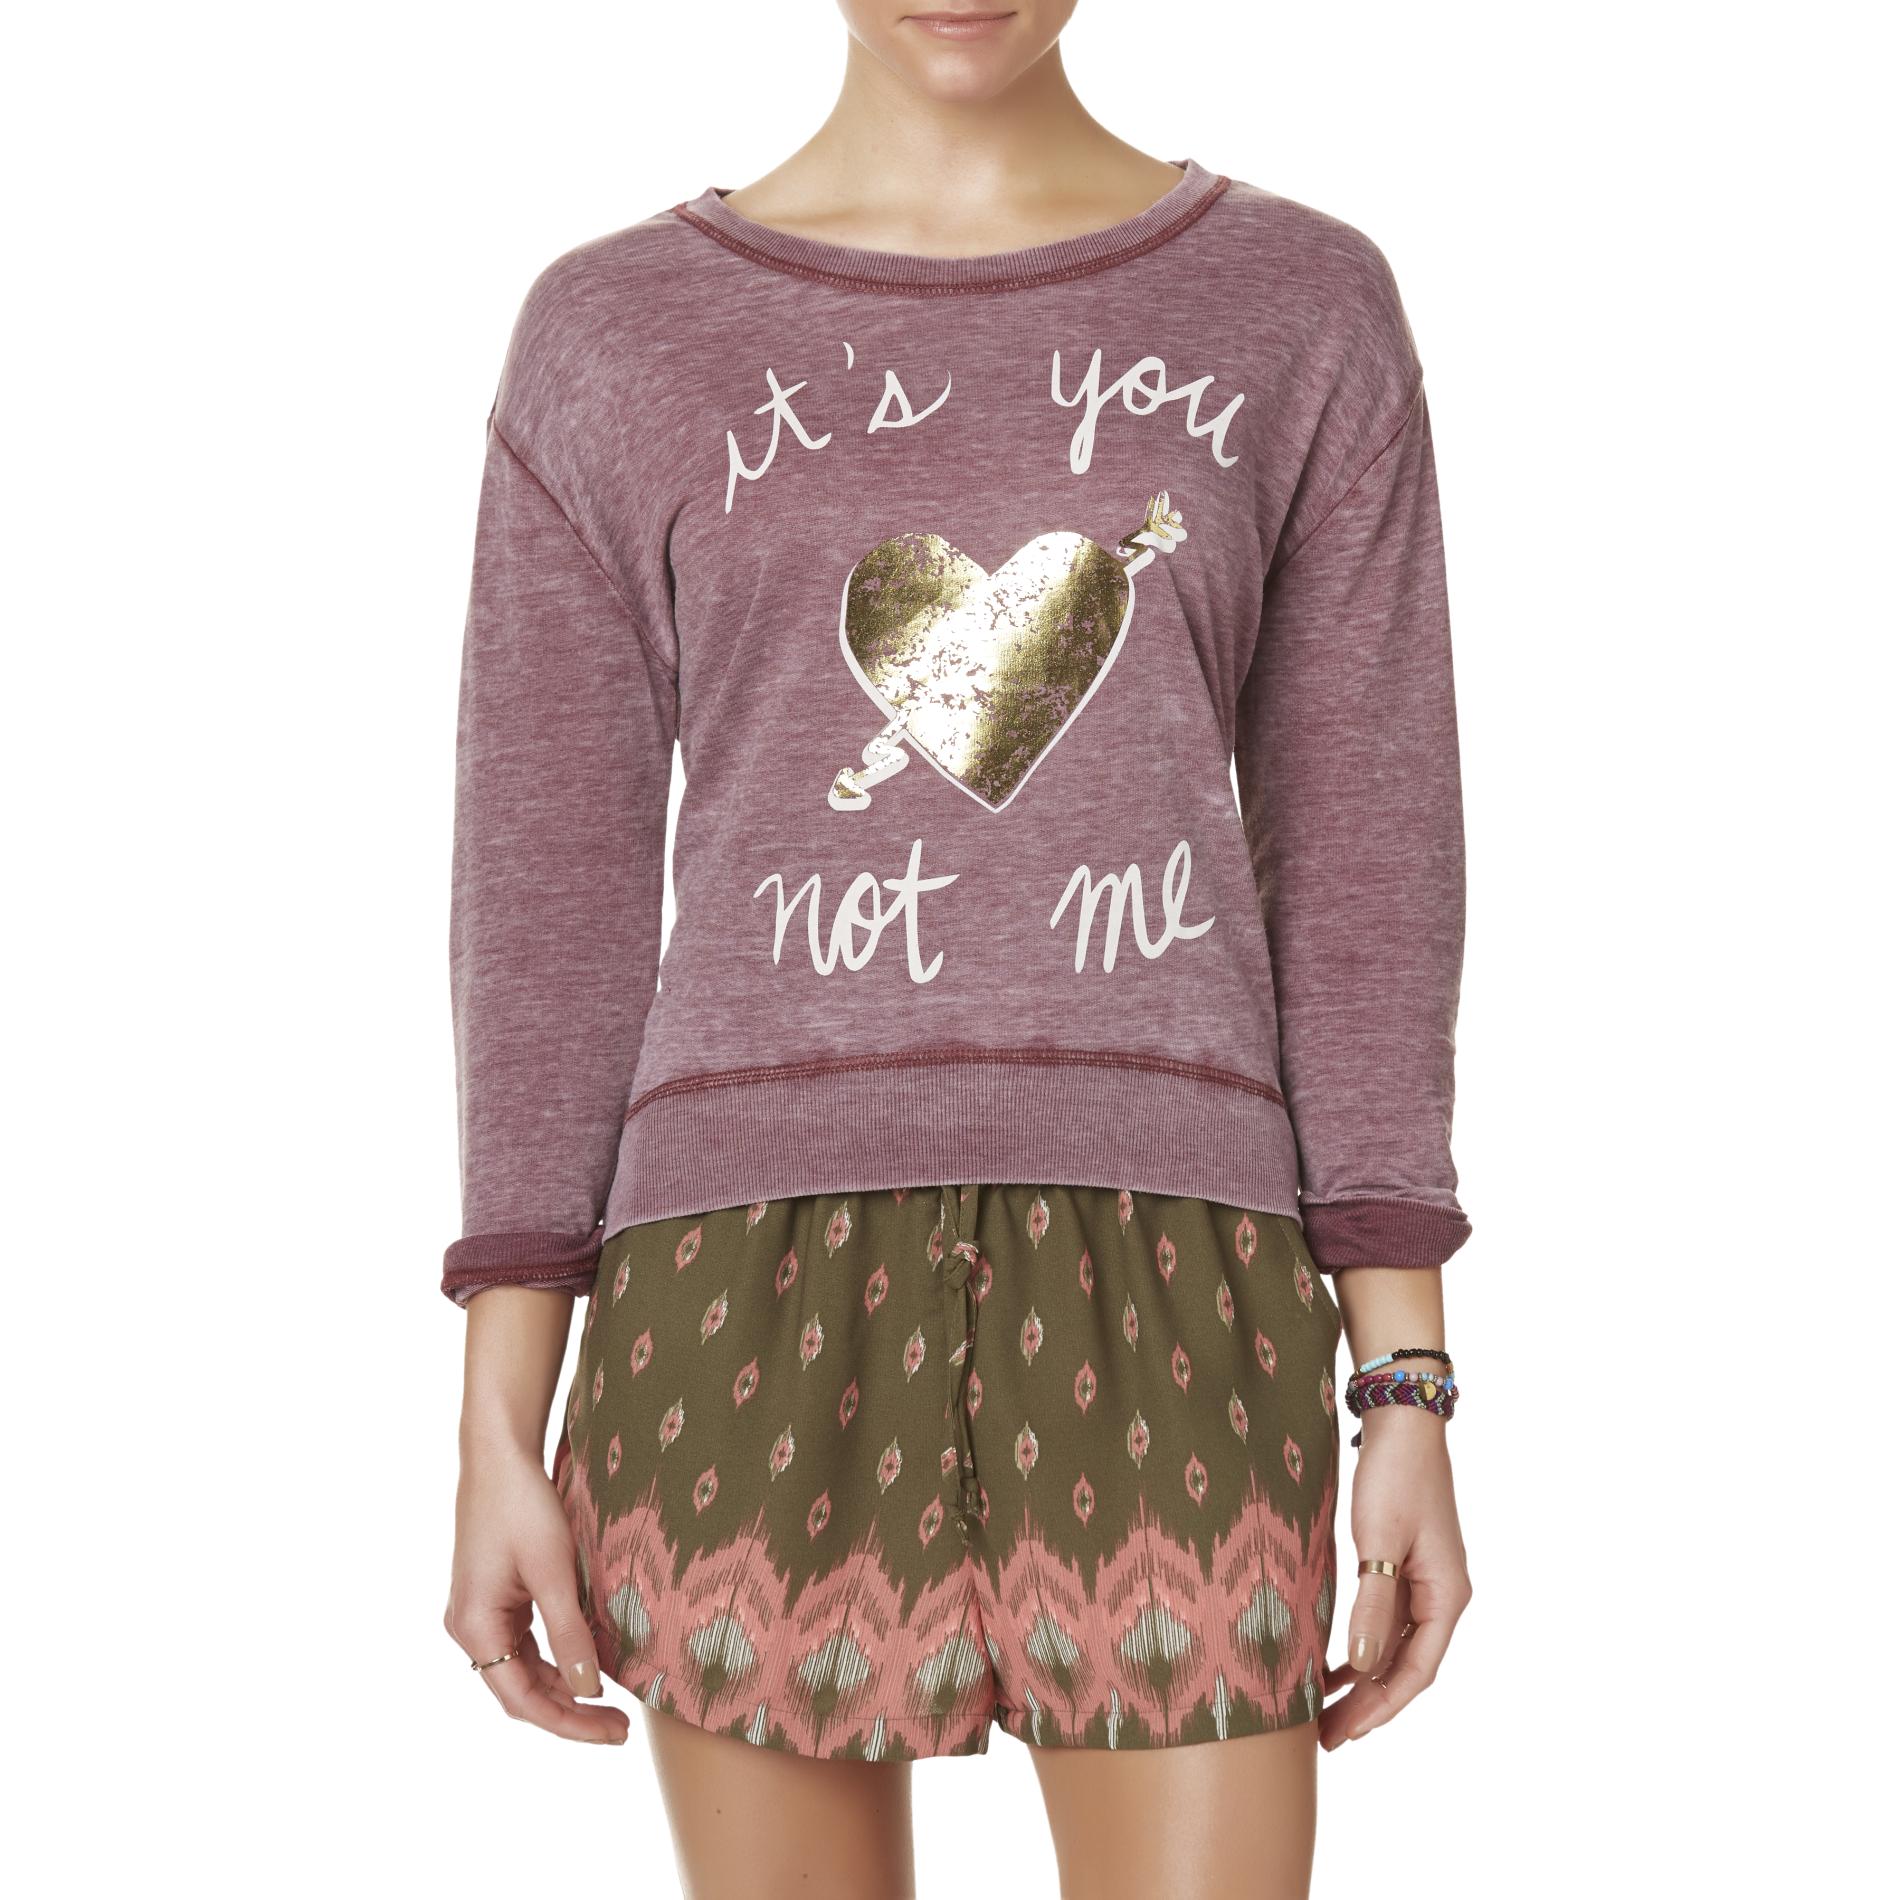 Wild Kiss Juniors' Burnout French Terry Knit Graphic Top - Heart